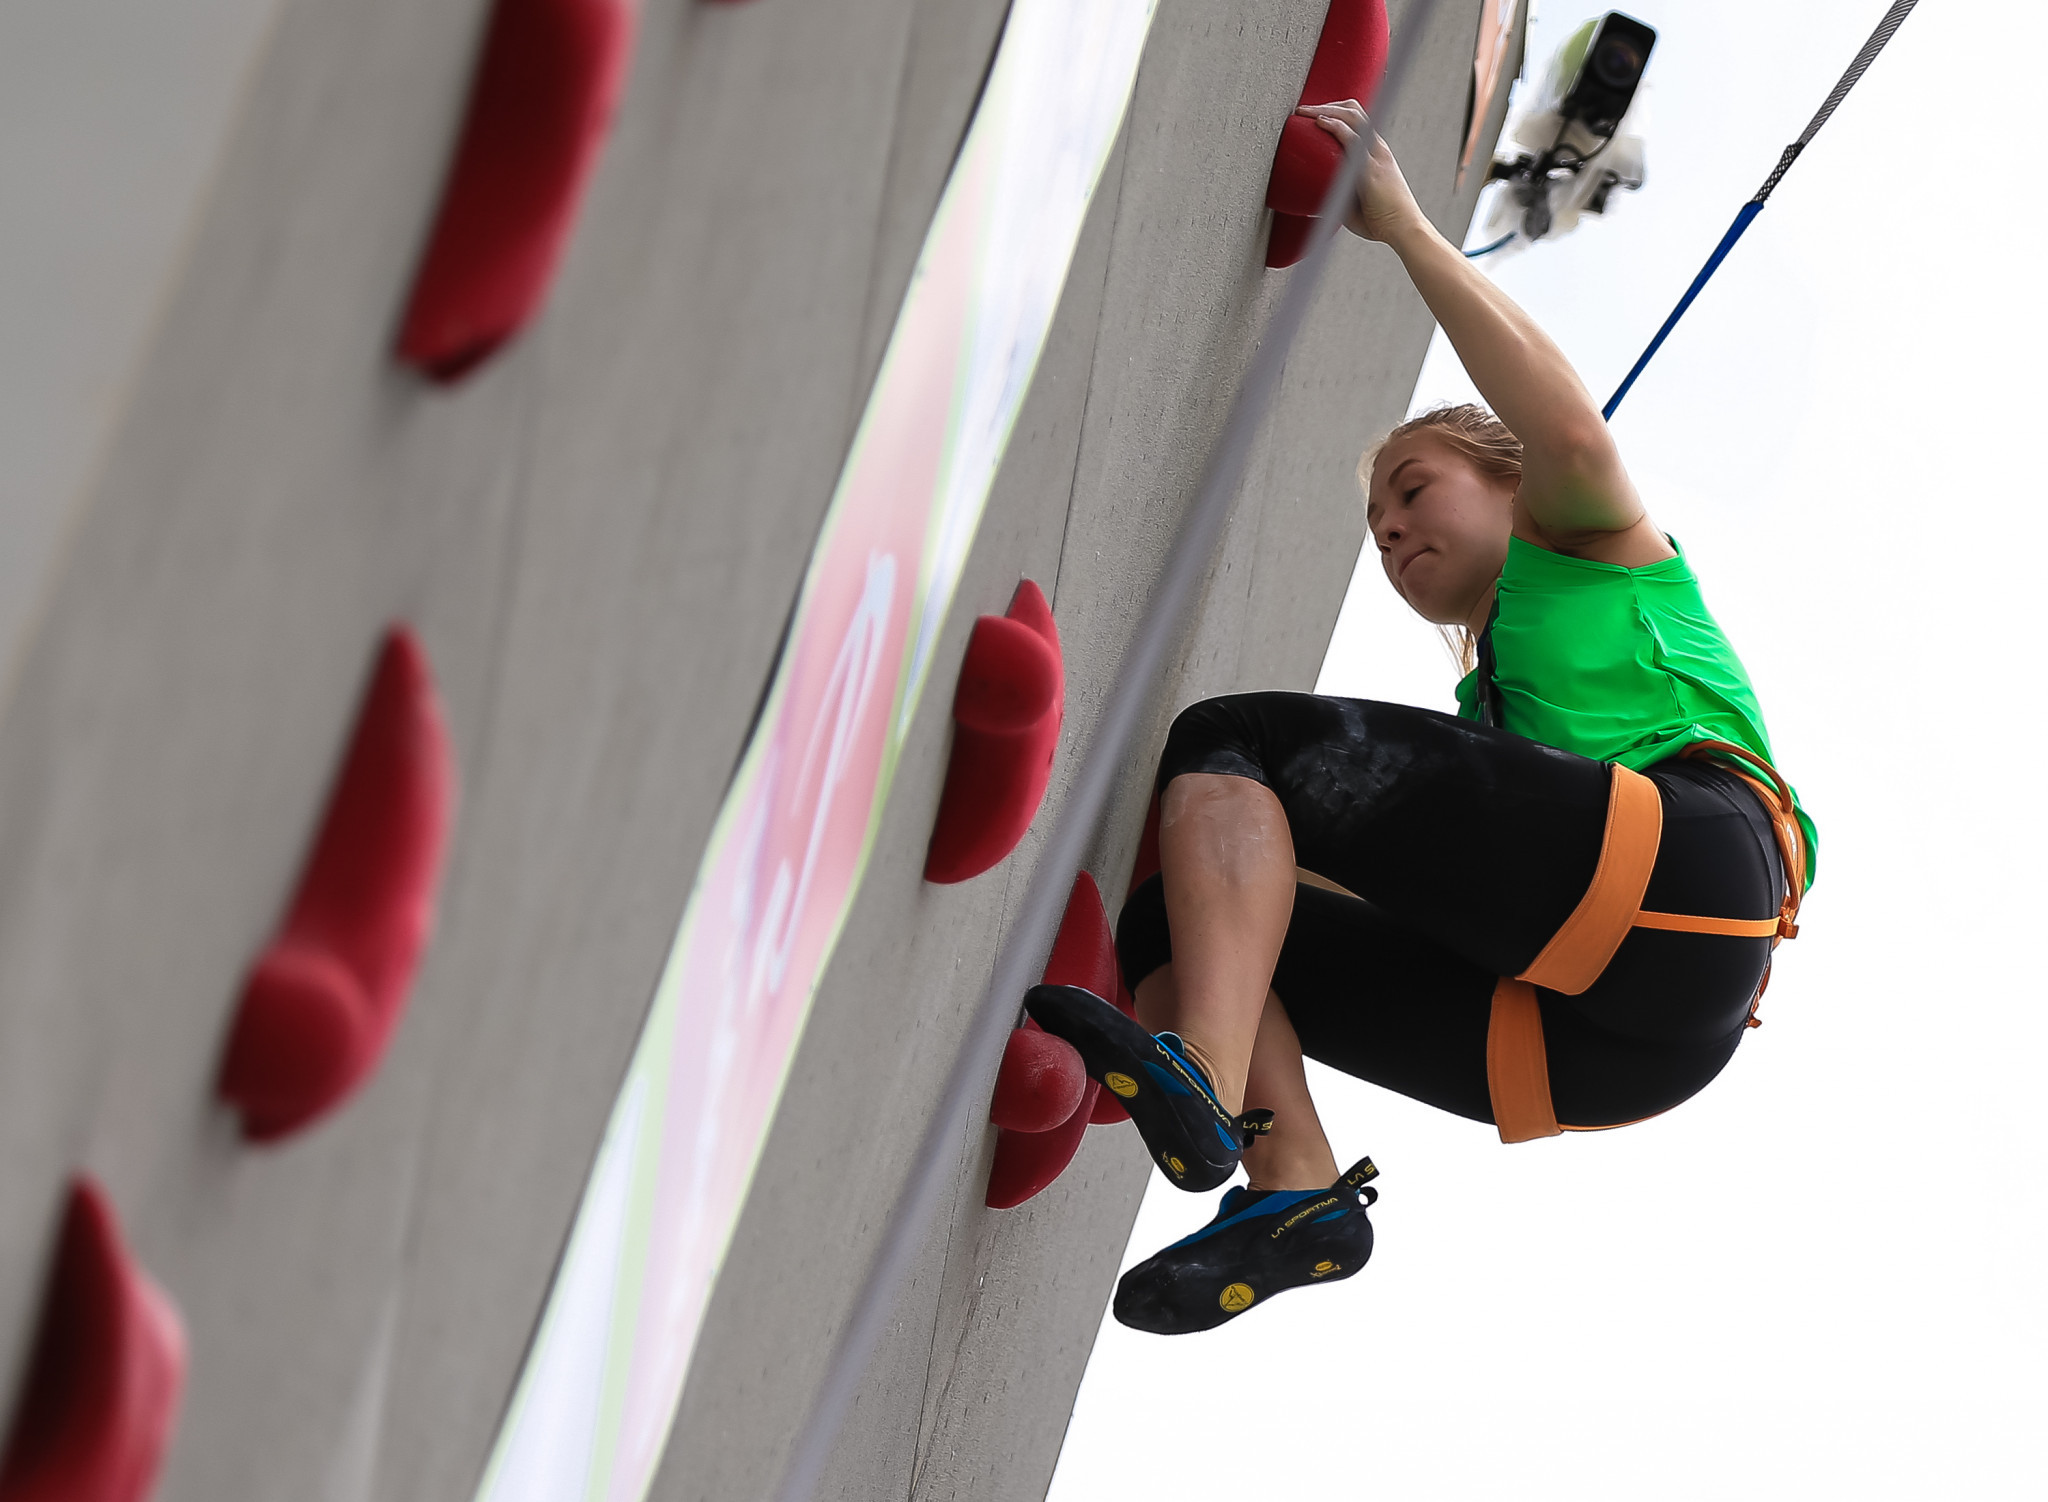 Salt Lake City will host two IFSC World Cup events in May ©Getty Images